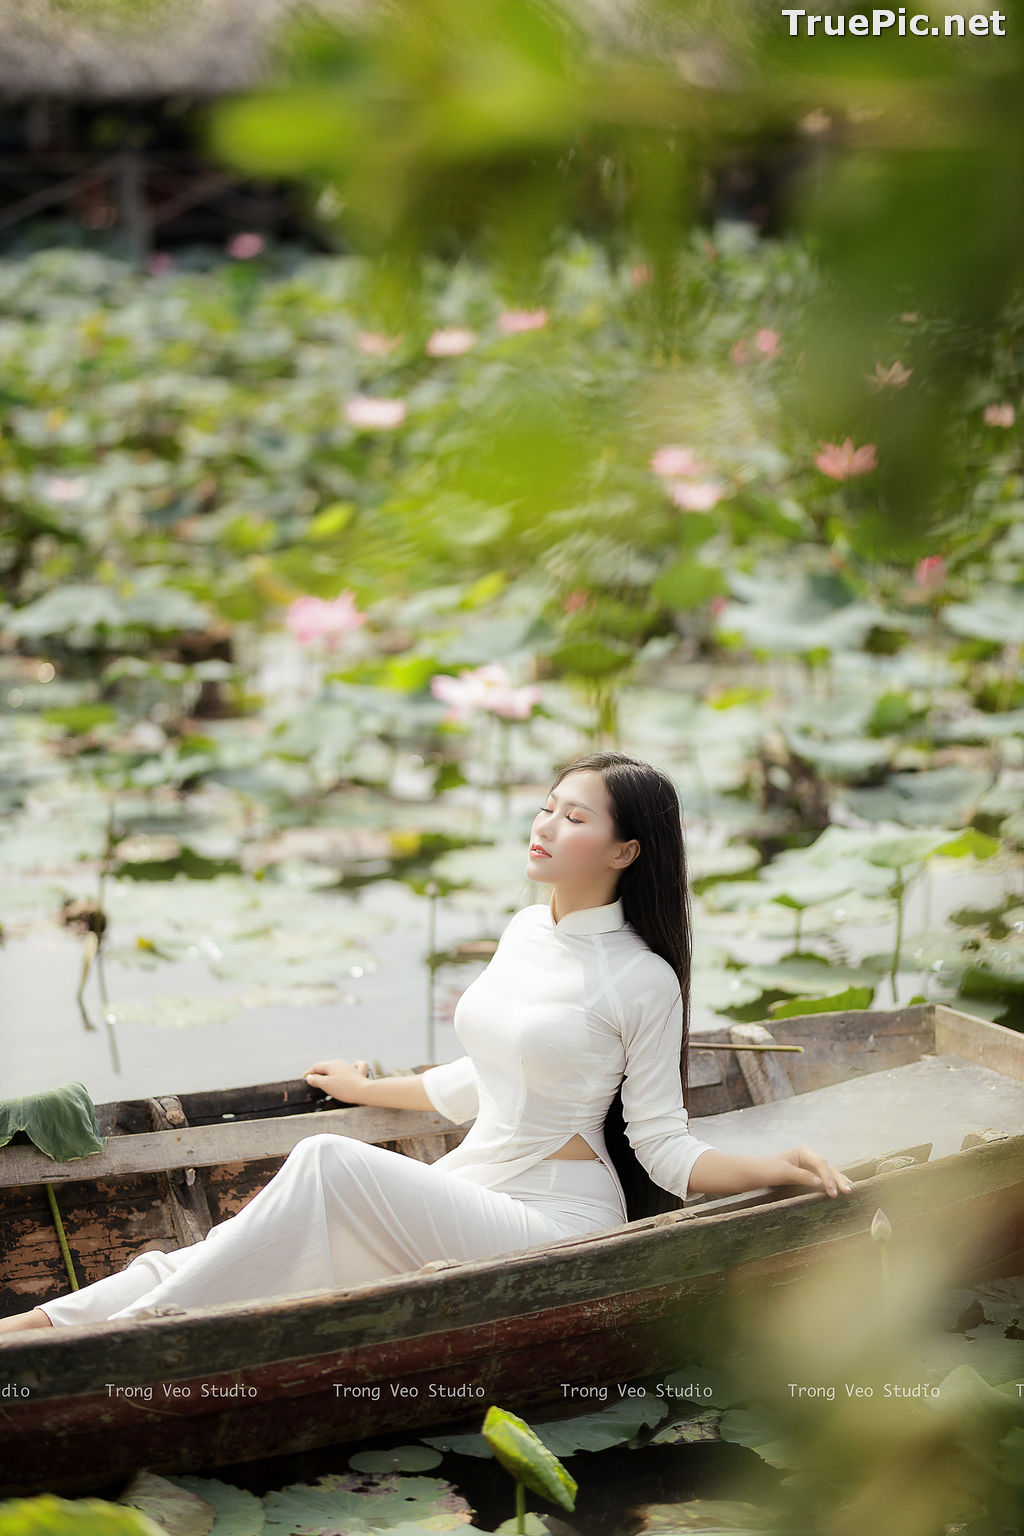 Image The Beauty of Vietnamese Girls with Traditional Dress (Ao Dai) #3 - TruePic.net - Picture-63